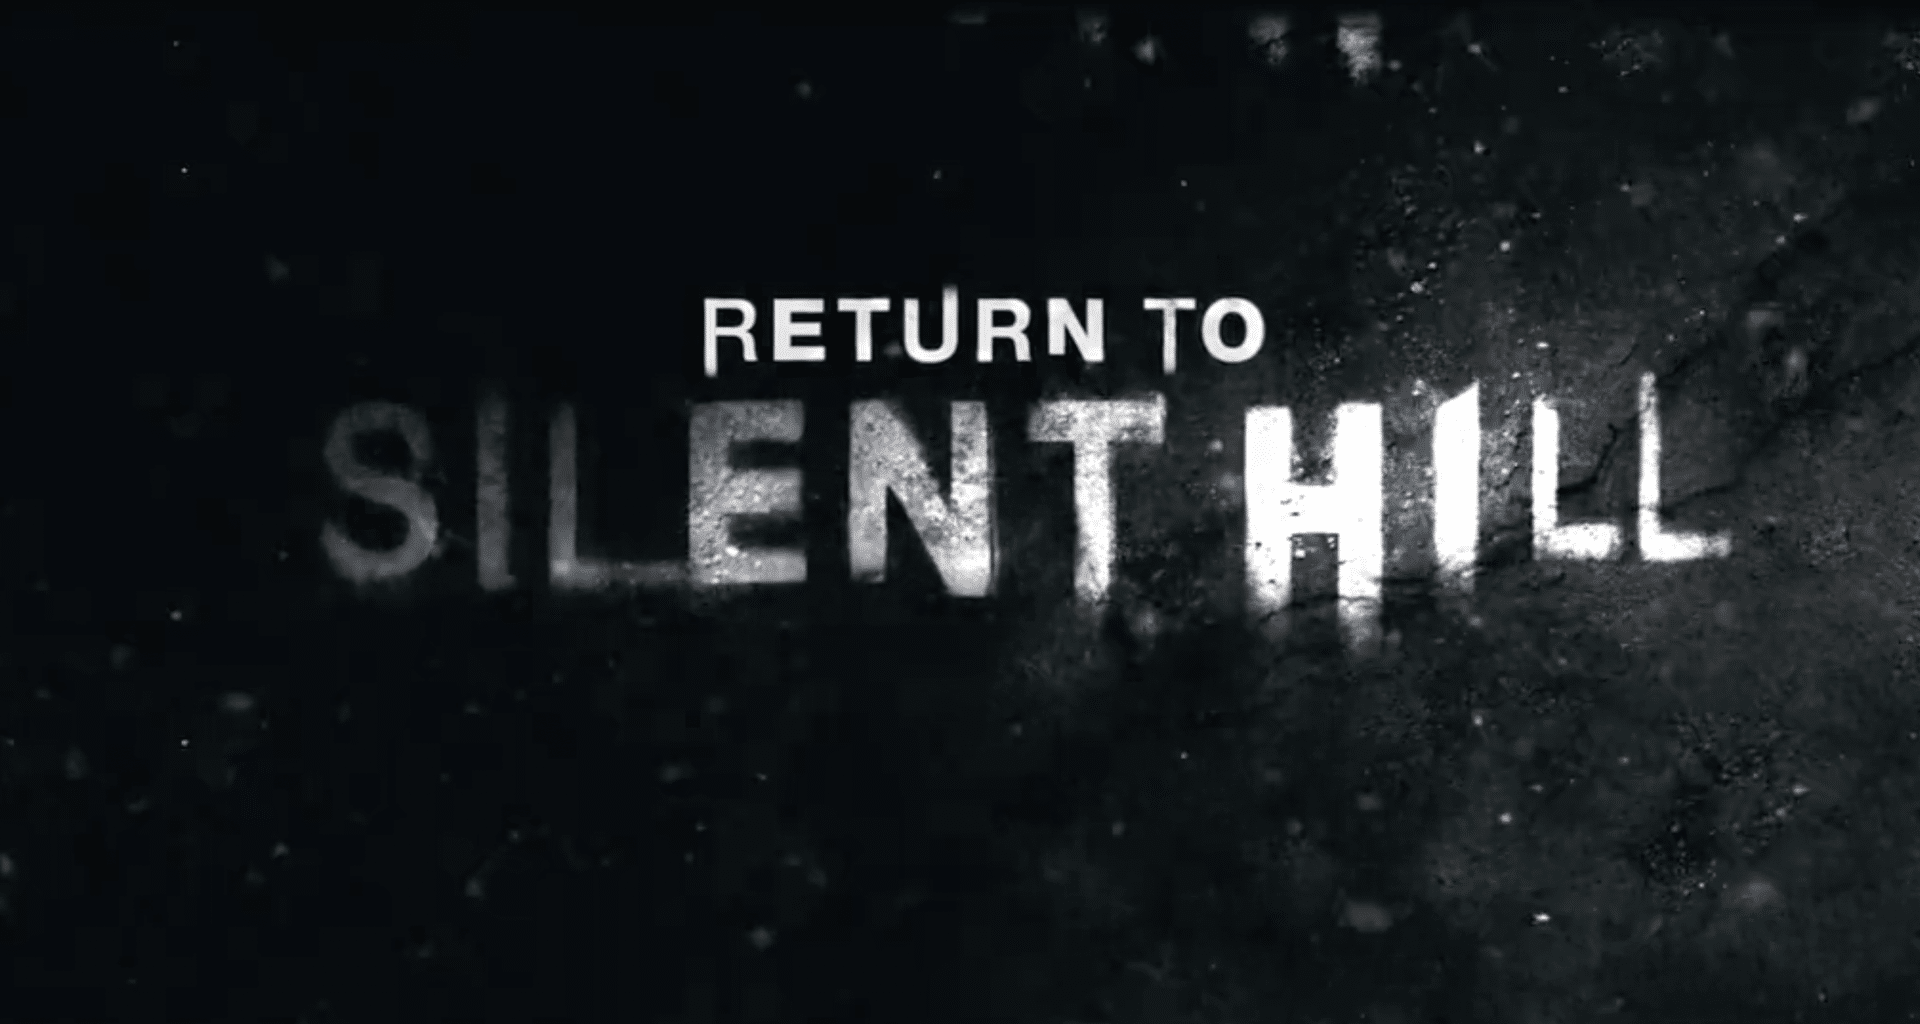 Return to Silent Hill Movie Announced 1